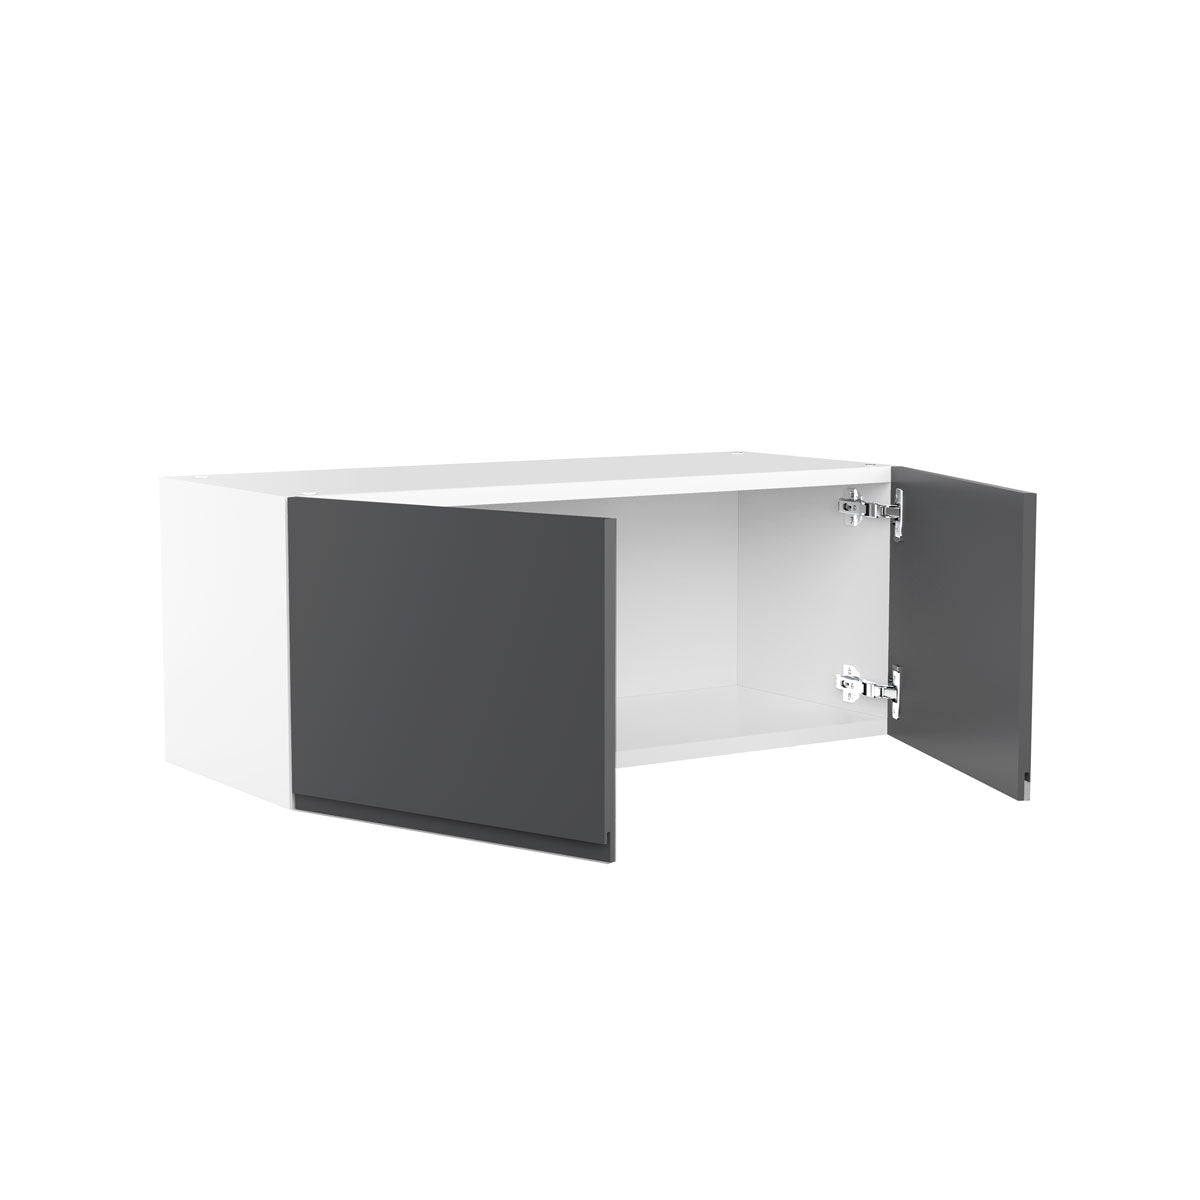 RTA - Lacquer Grey - Double Door Wall Cabinets | 33"W x 12"H x 12"D